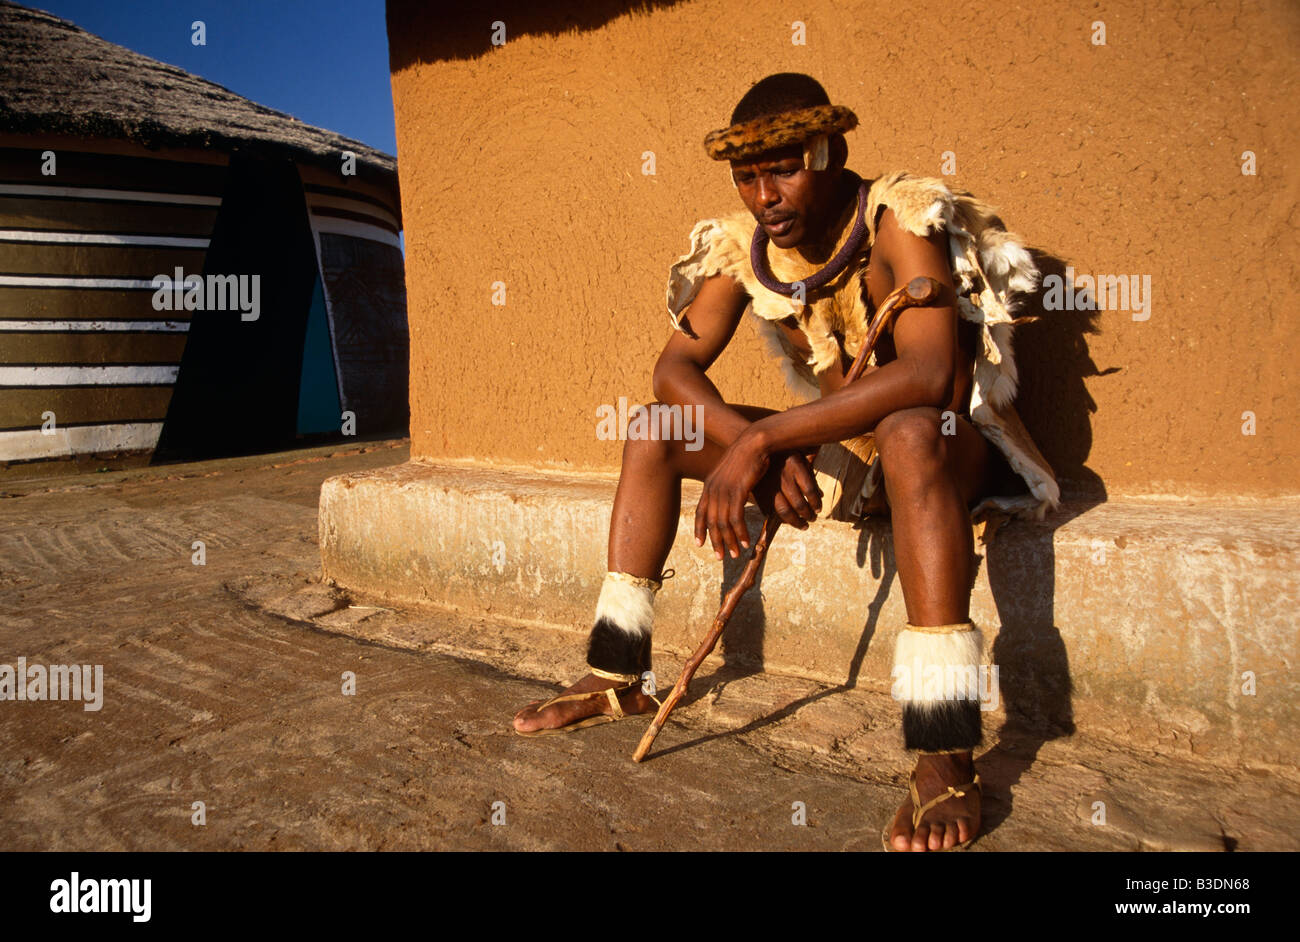 Ndebele man outside his hut in South Africa. Stock Photo